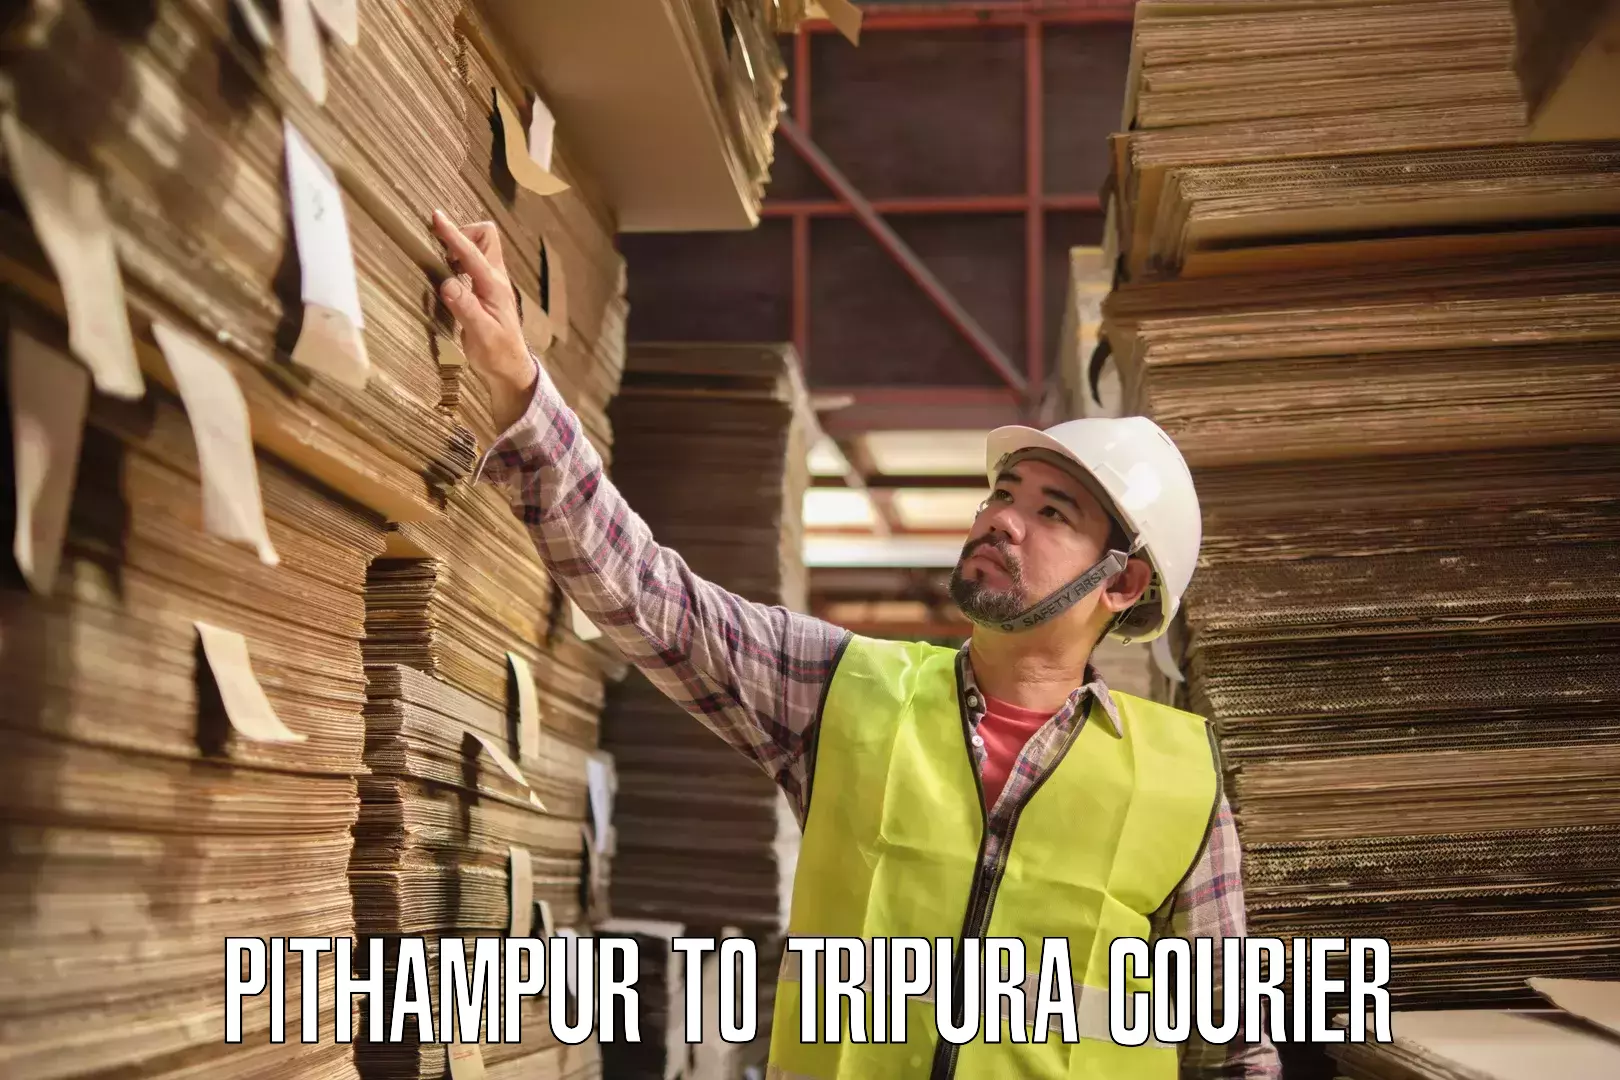 Courier service efficiency Pithampur to Tripura